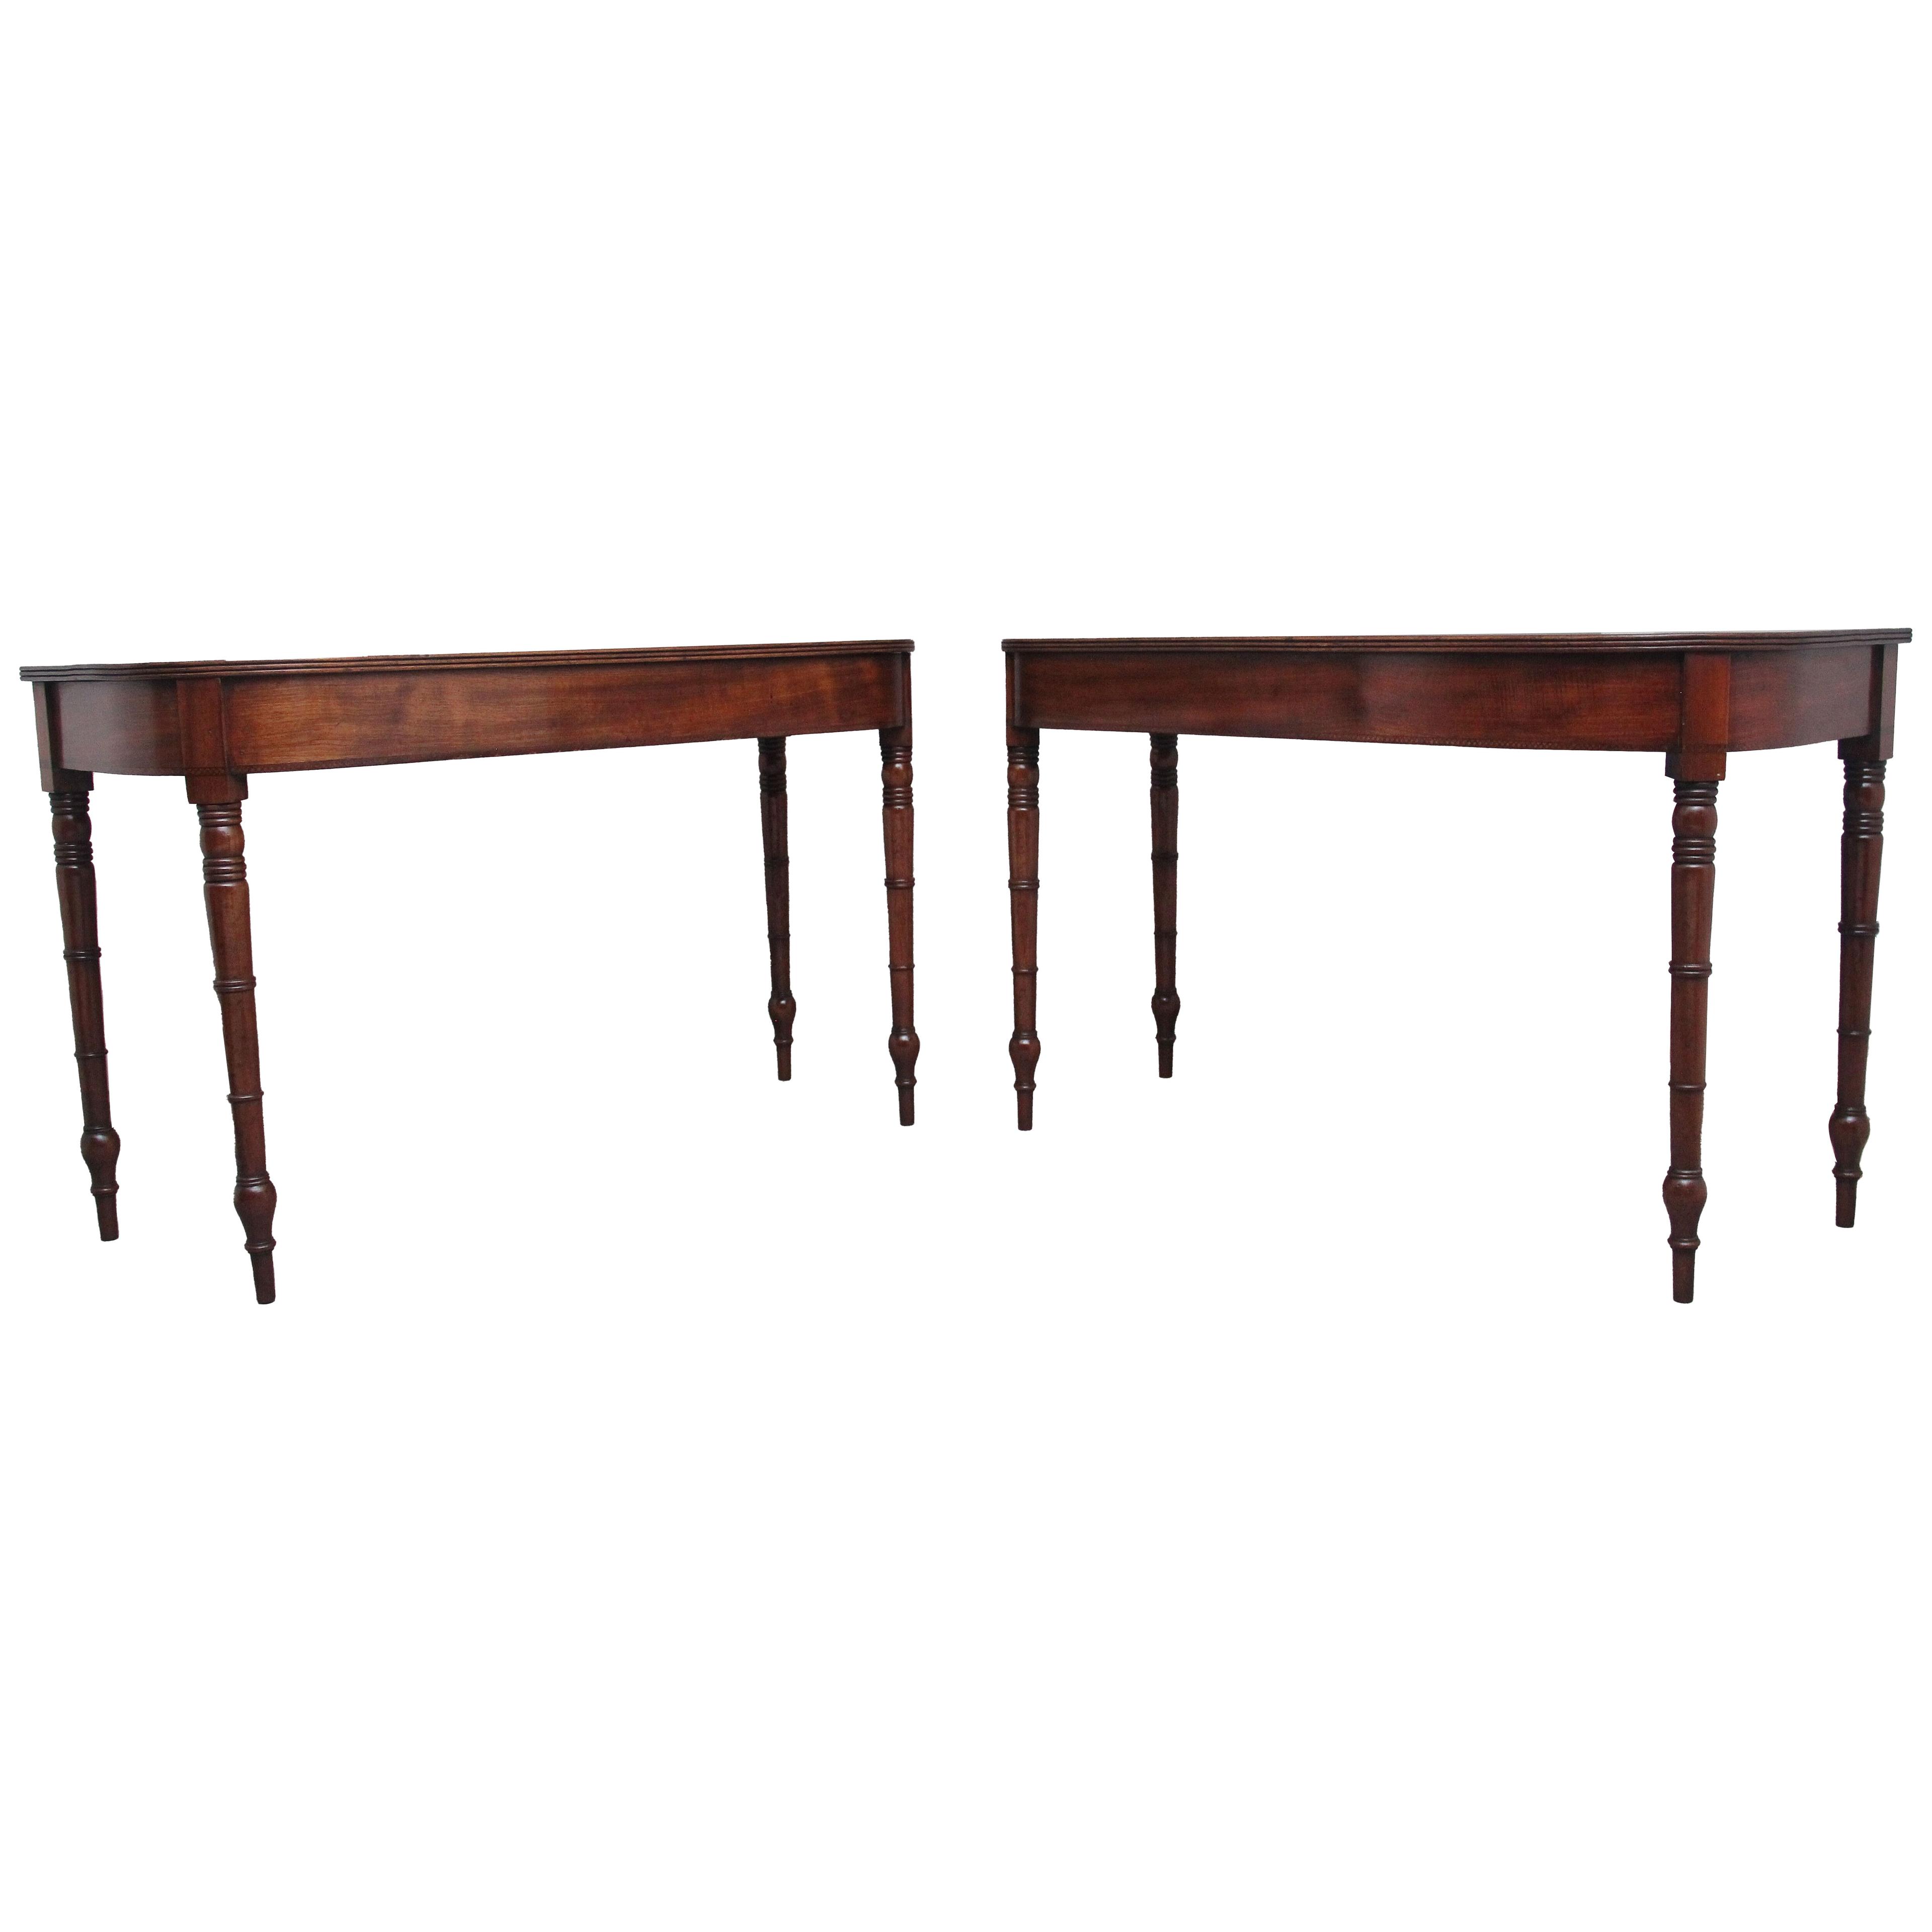 Pair of early 19th Century antique console tables